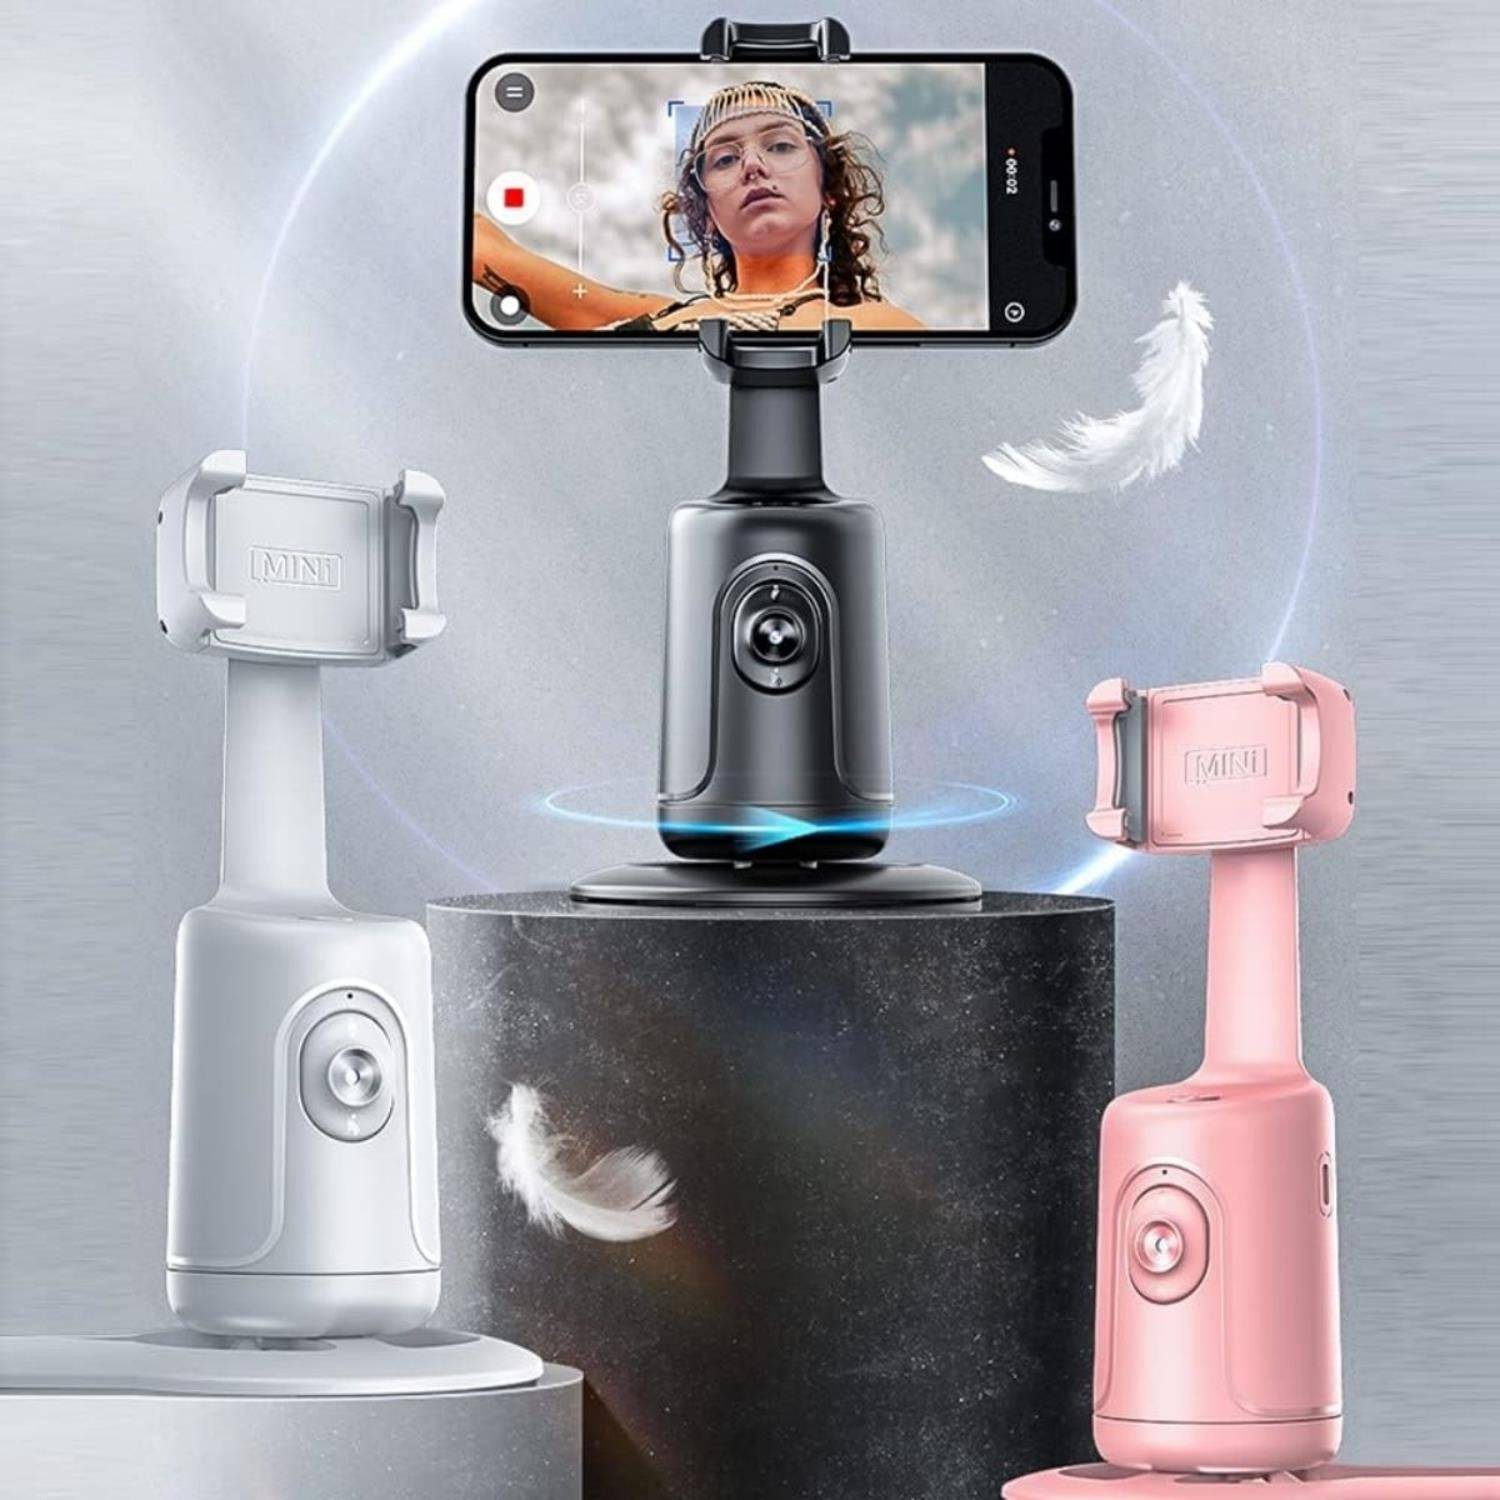 Automatic facial tracking tripod -360 ° rotation automatic tracking phone holder, no application, phone camera holder with remote control in white